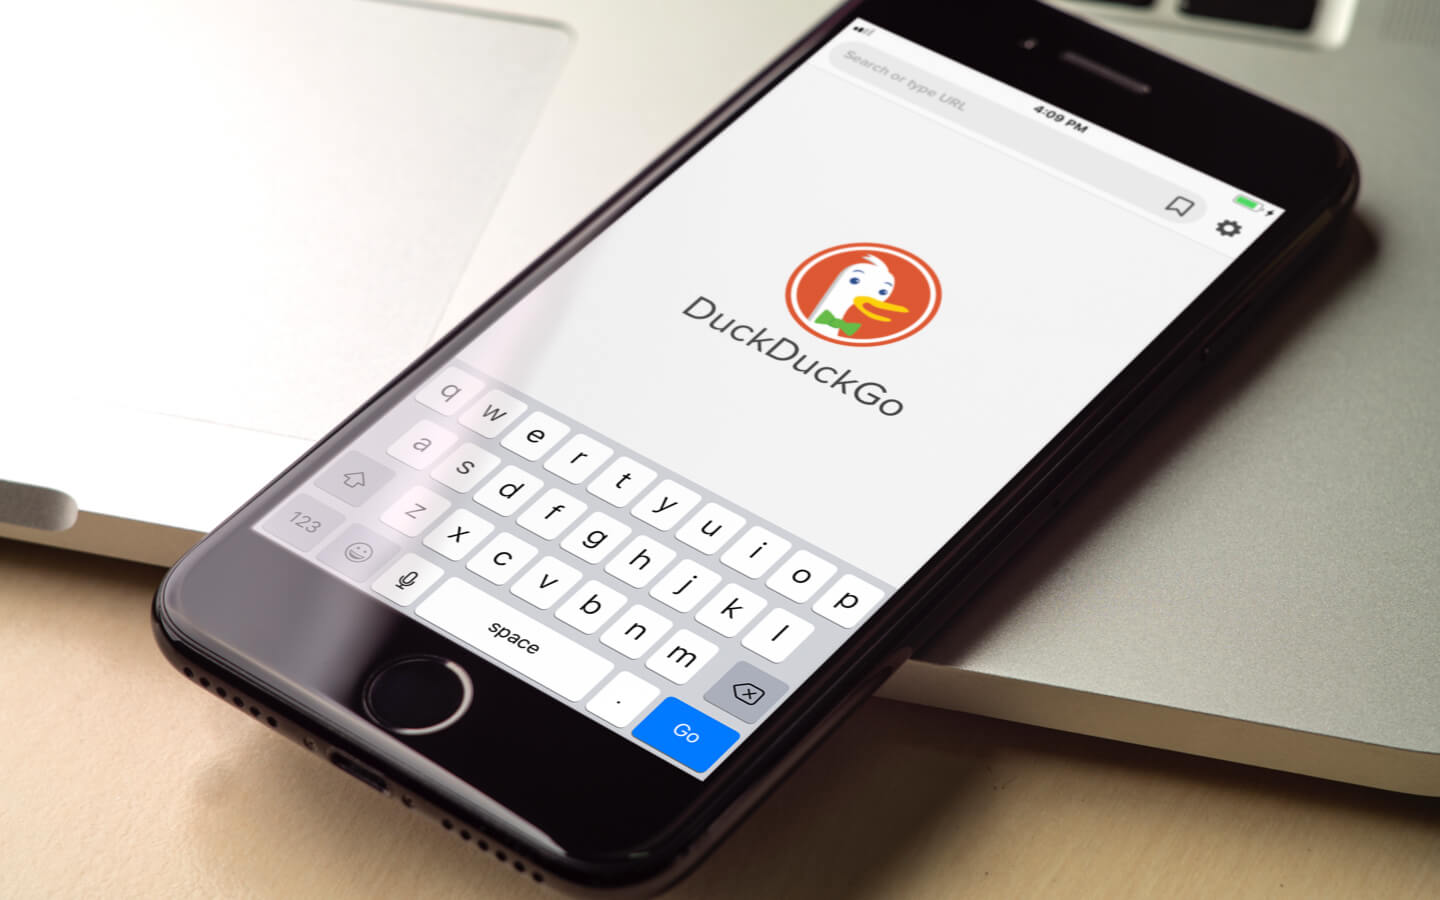 duckduckgo chrome extension review